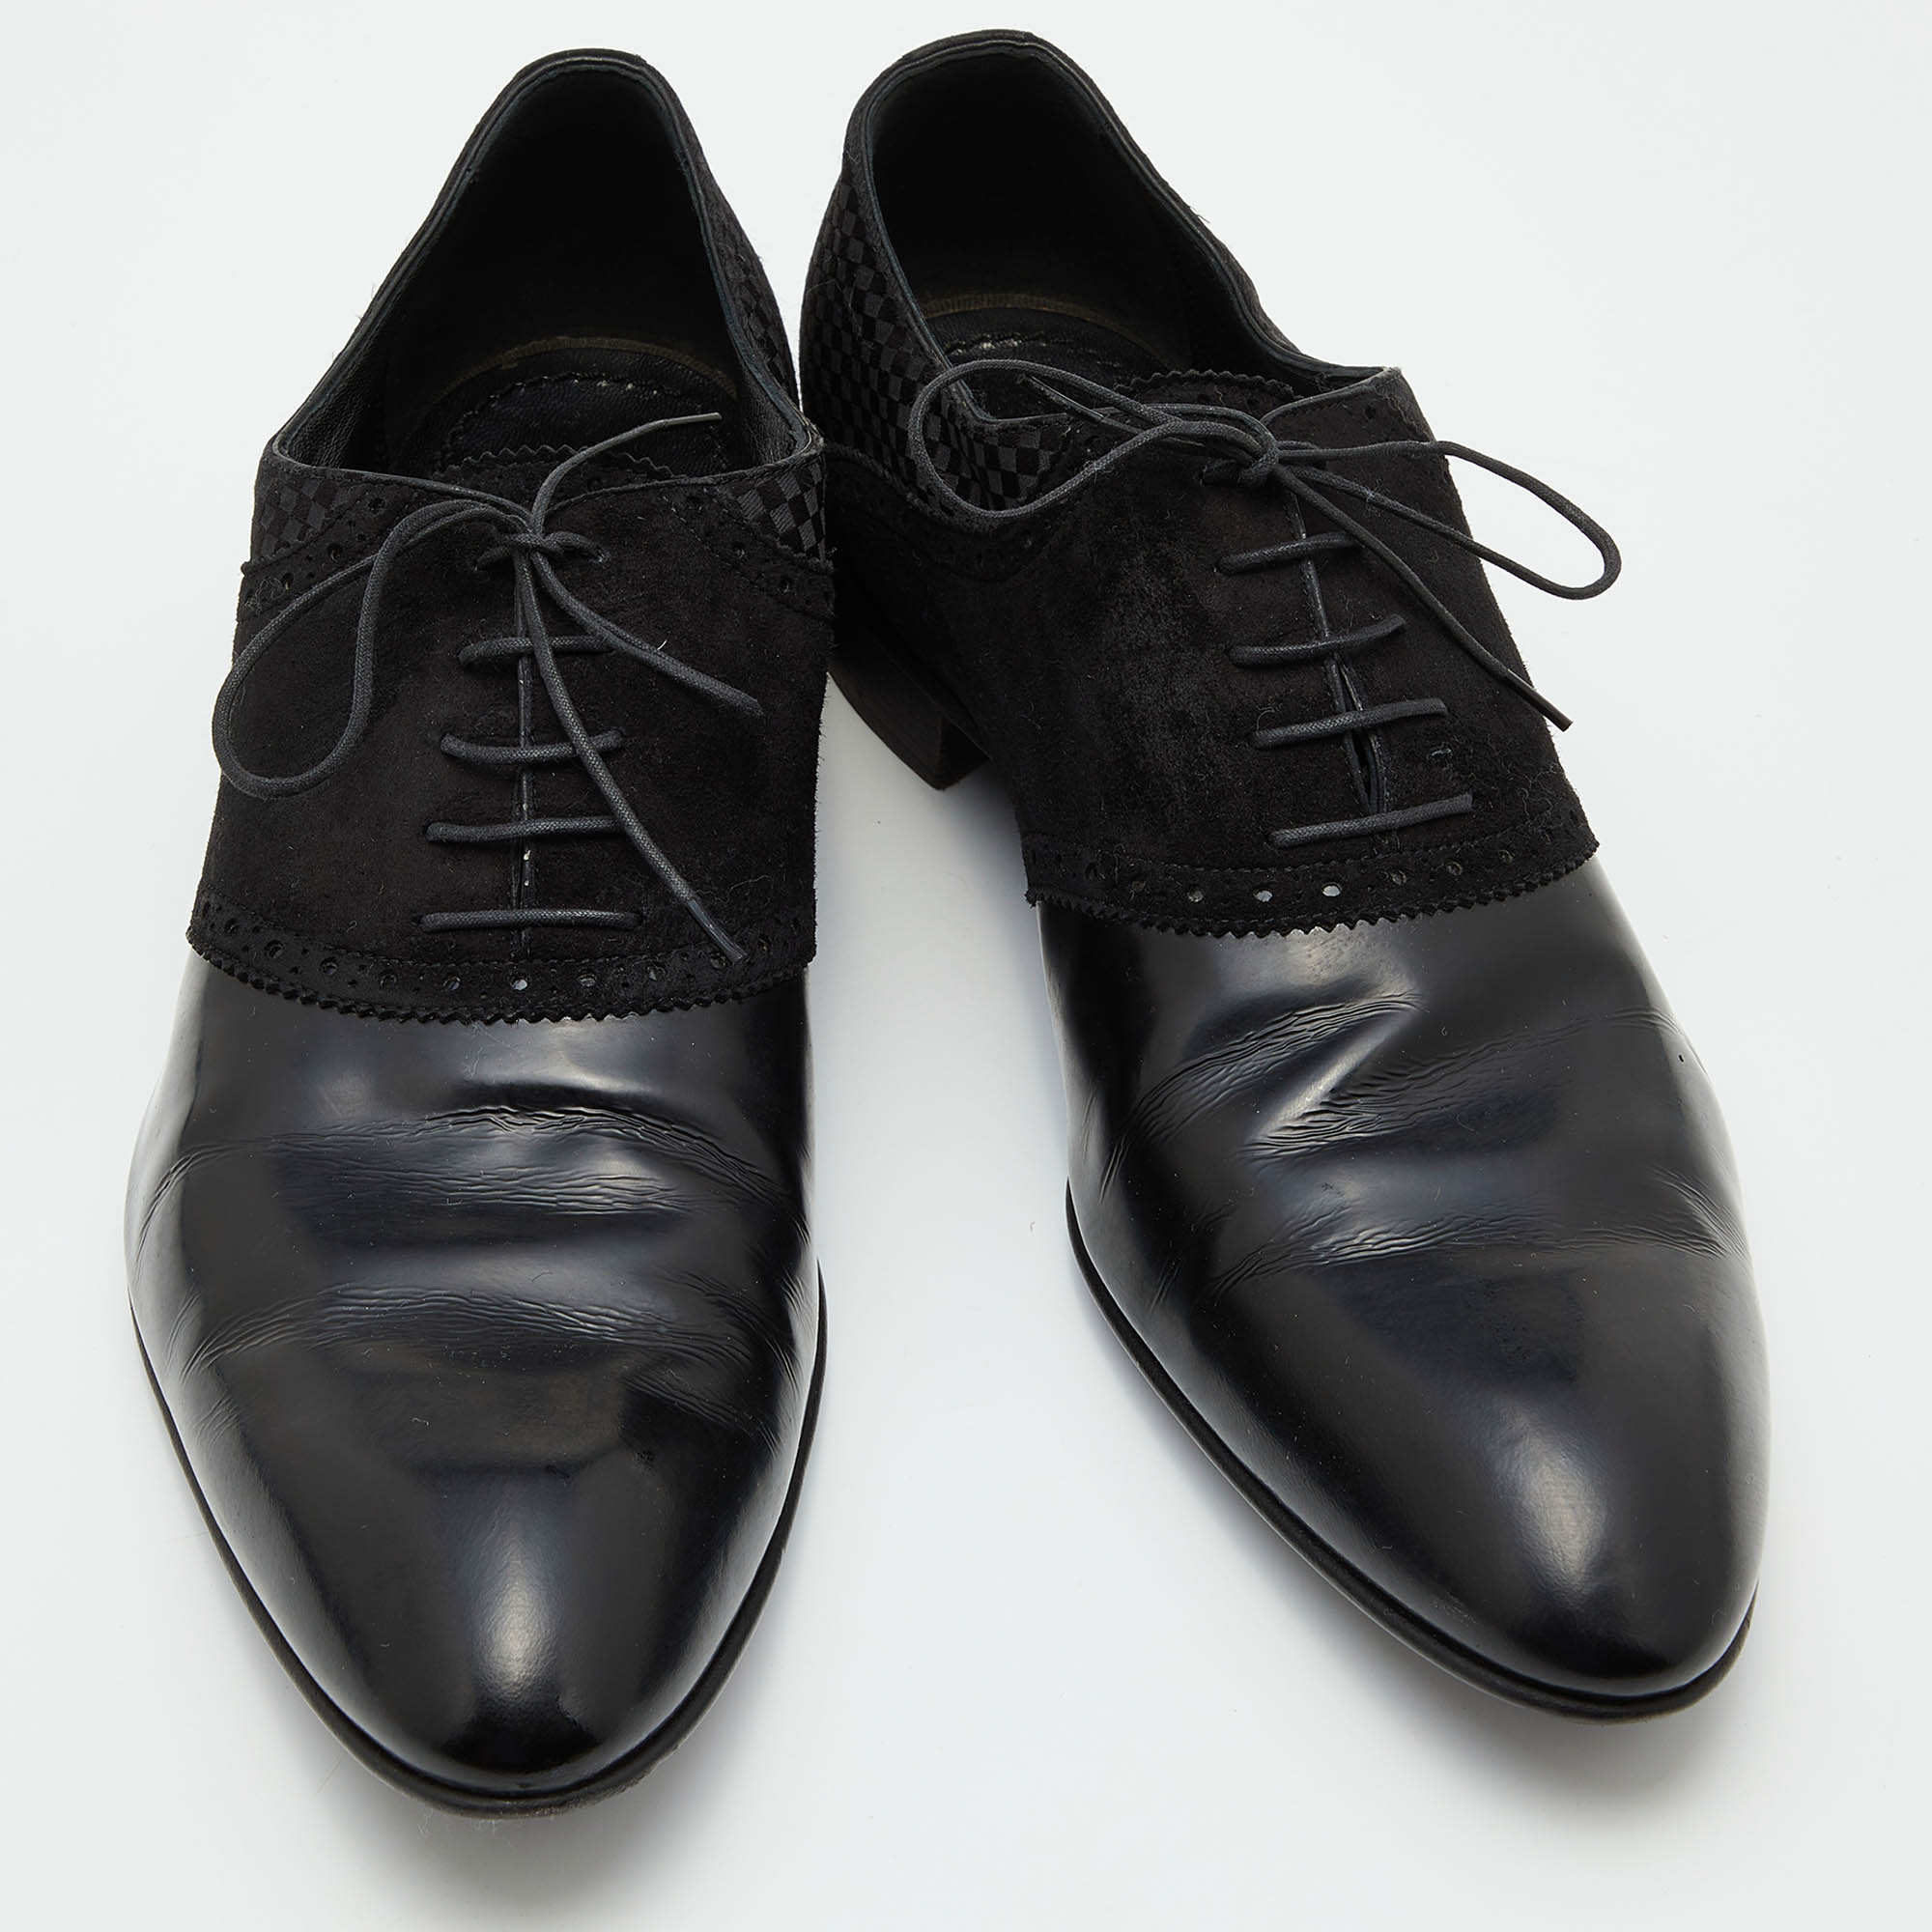 Louis Vuitton Black Damier Fabric, Suede And Leather Lace Up Oxfords Size 43